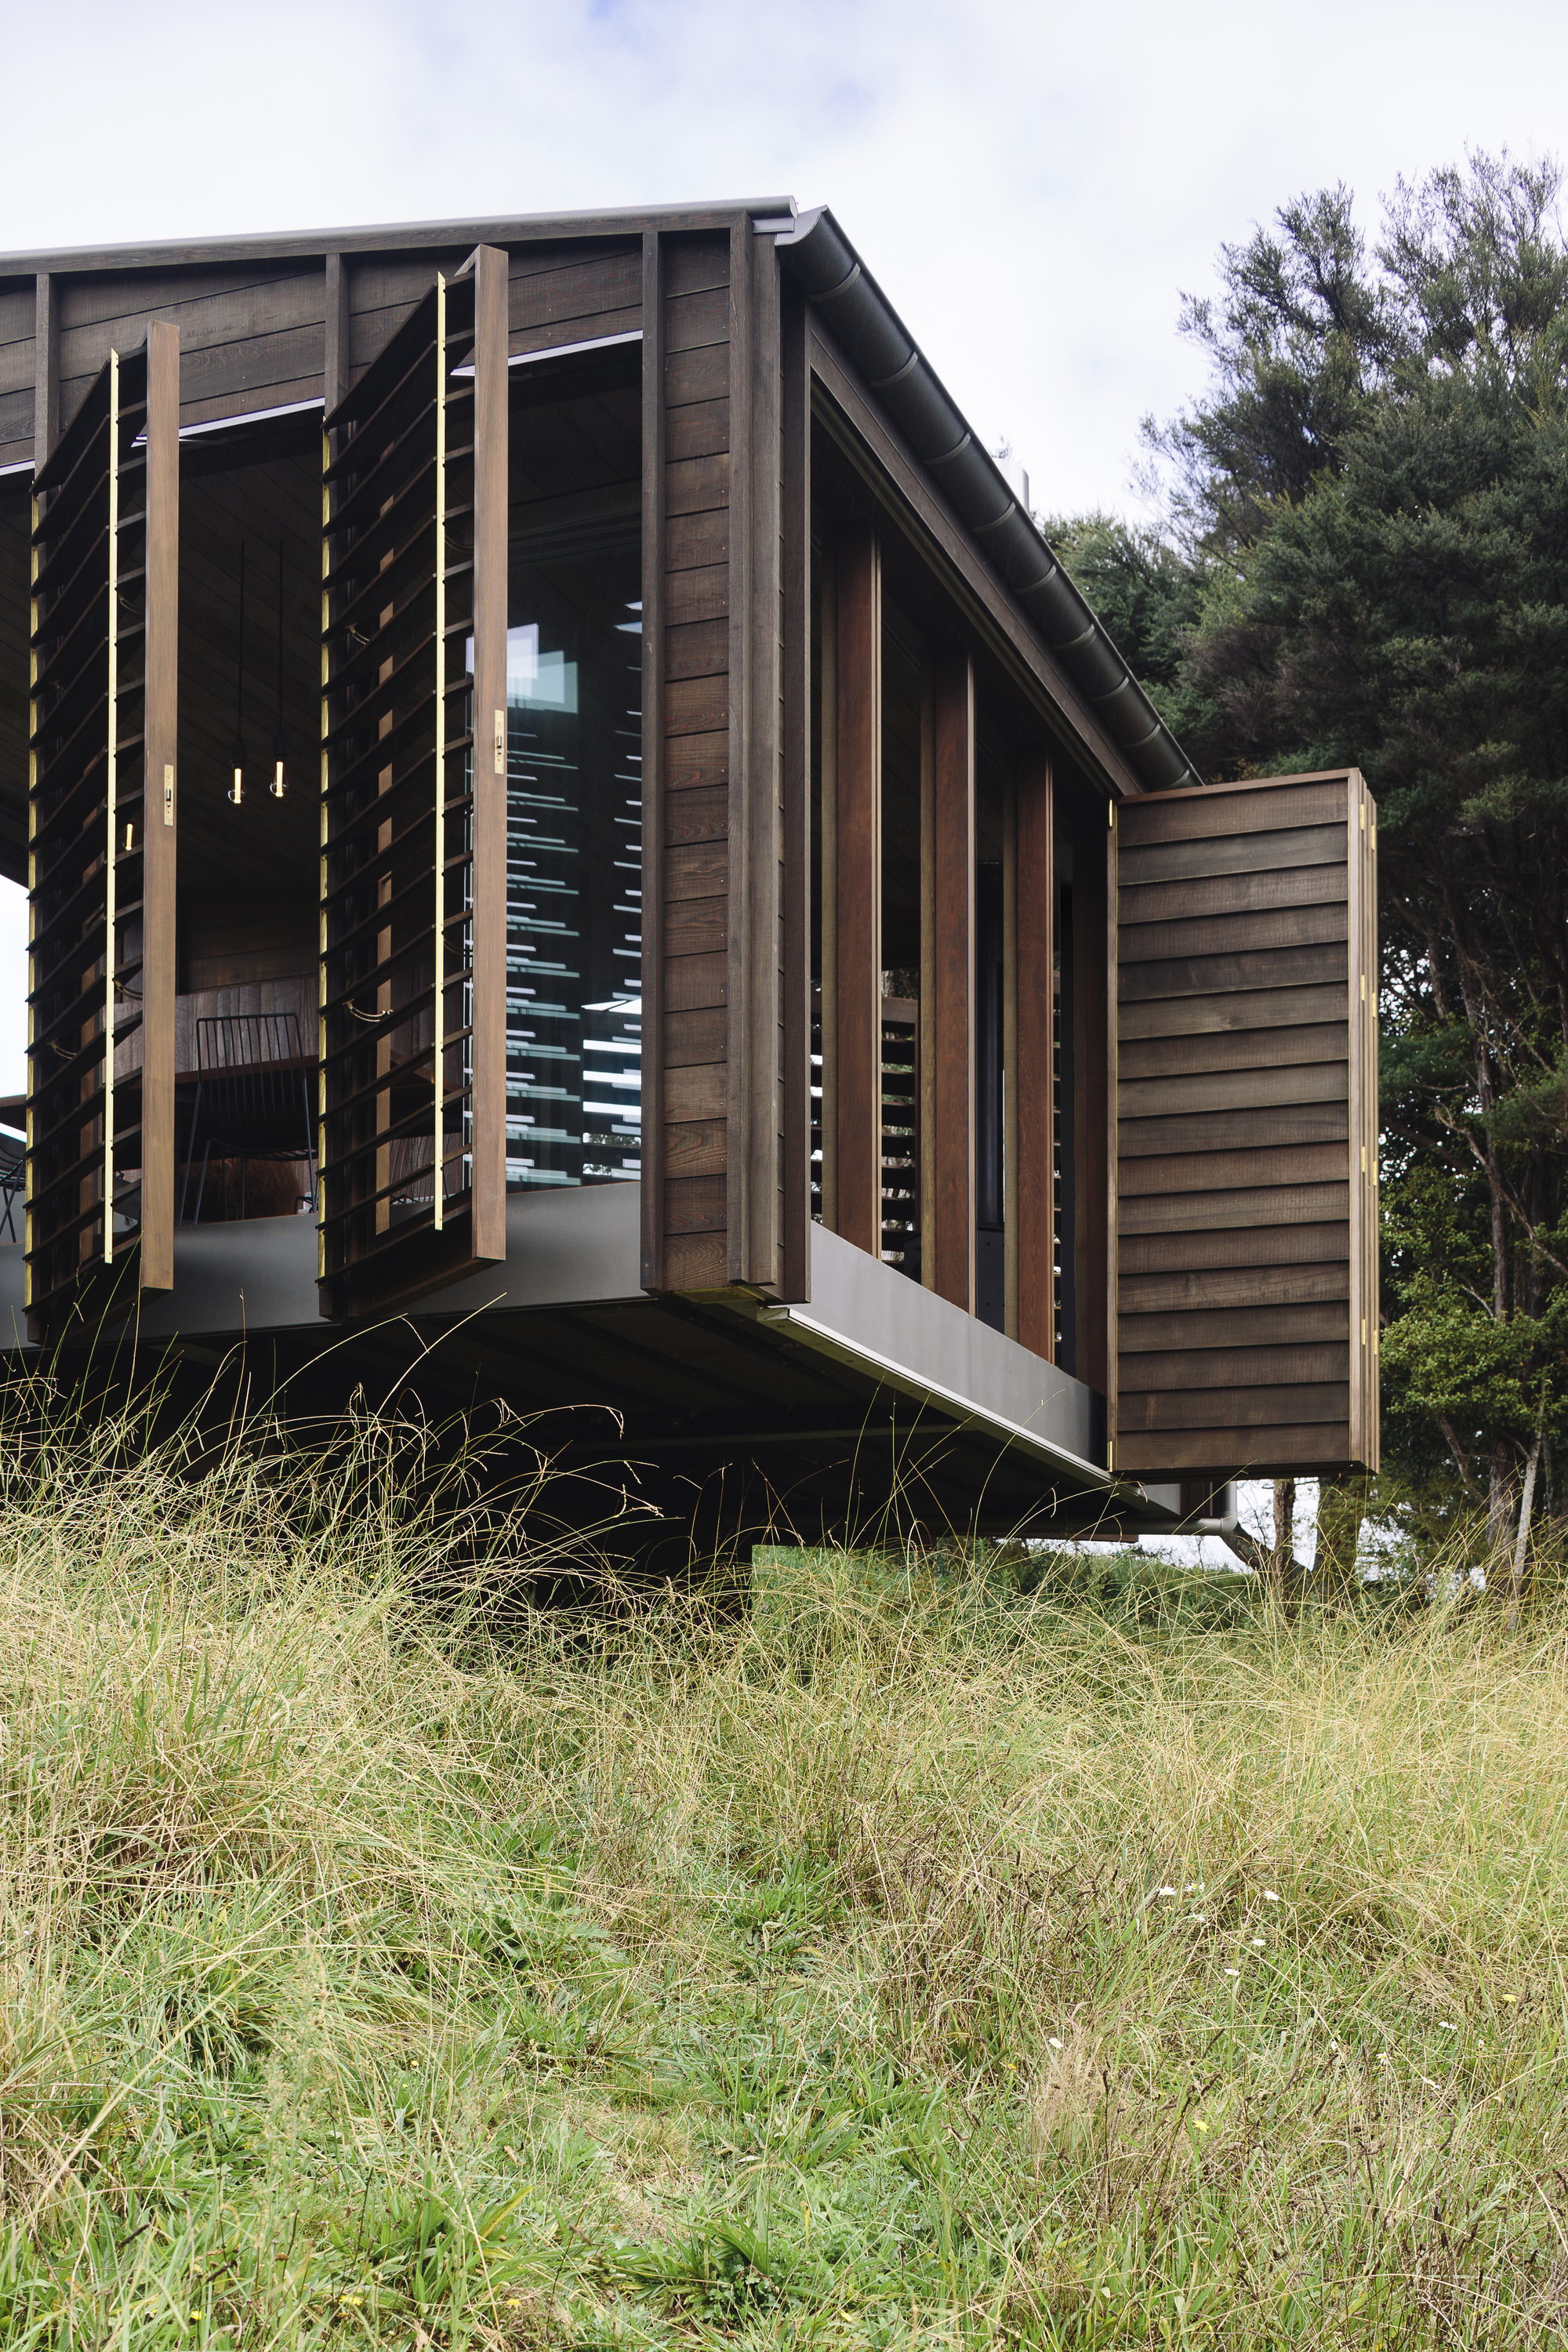 The Camp by Fearon Hay Architects